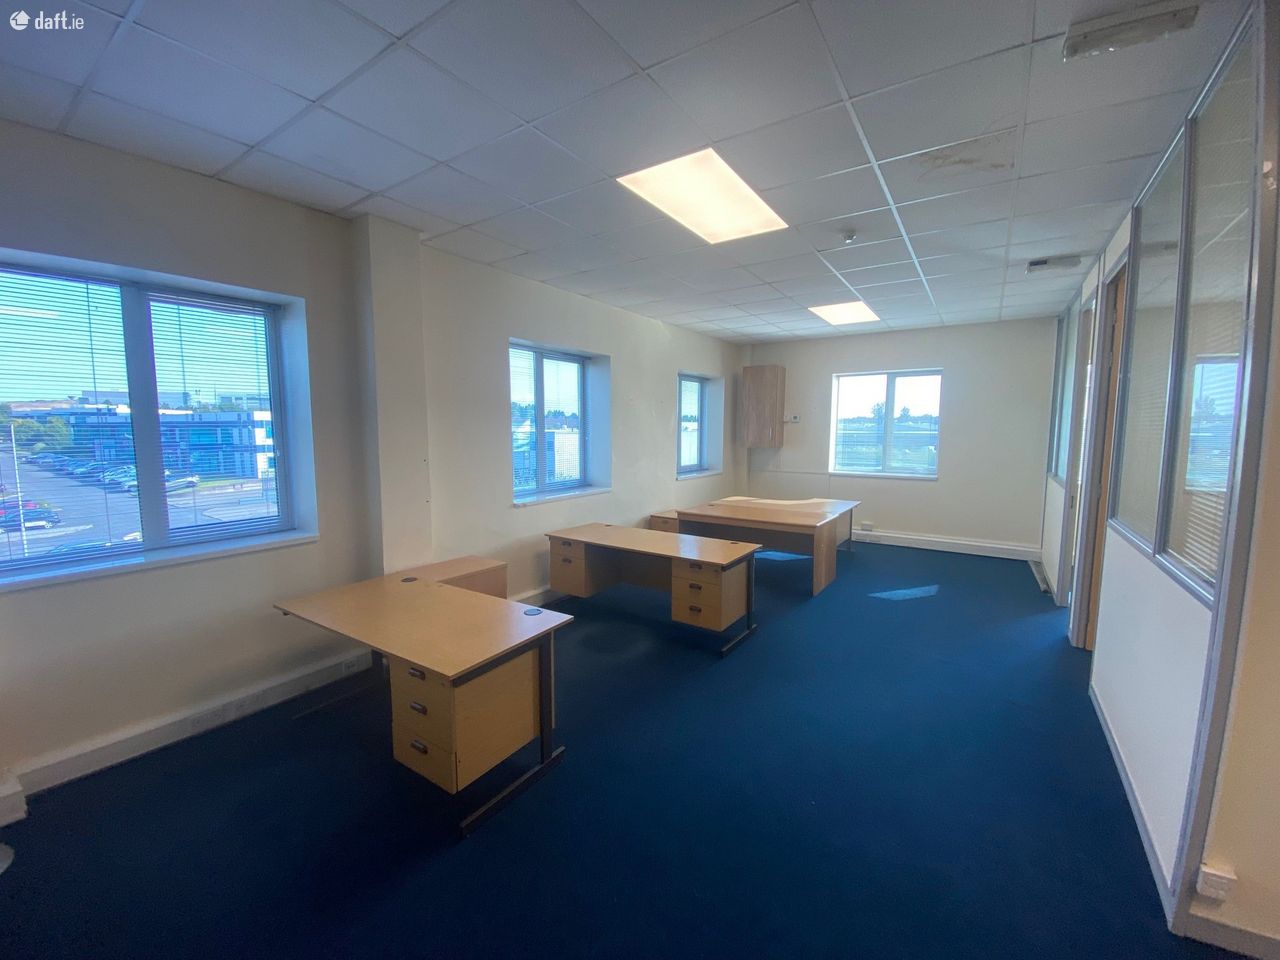 Second Floor, Block 6, Cleaboy Business Park, Cleaboy, Waterford City, Co. Waterford